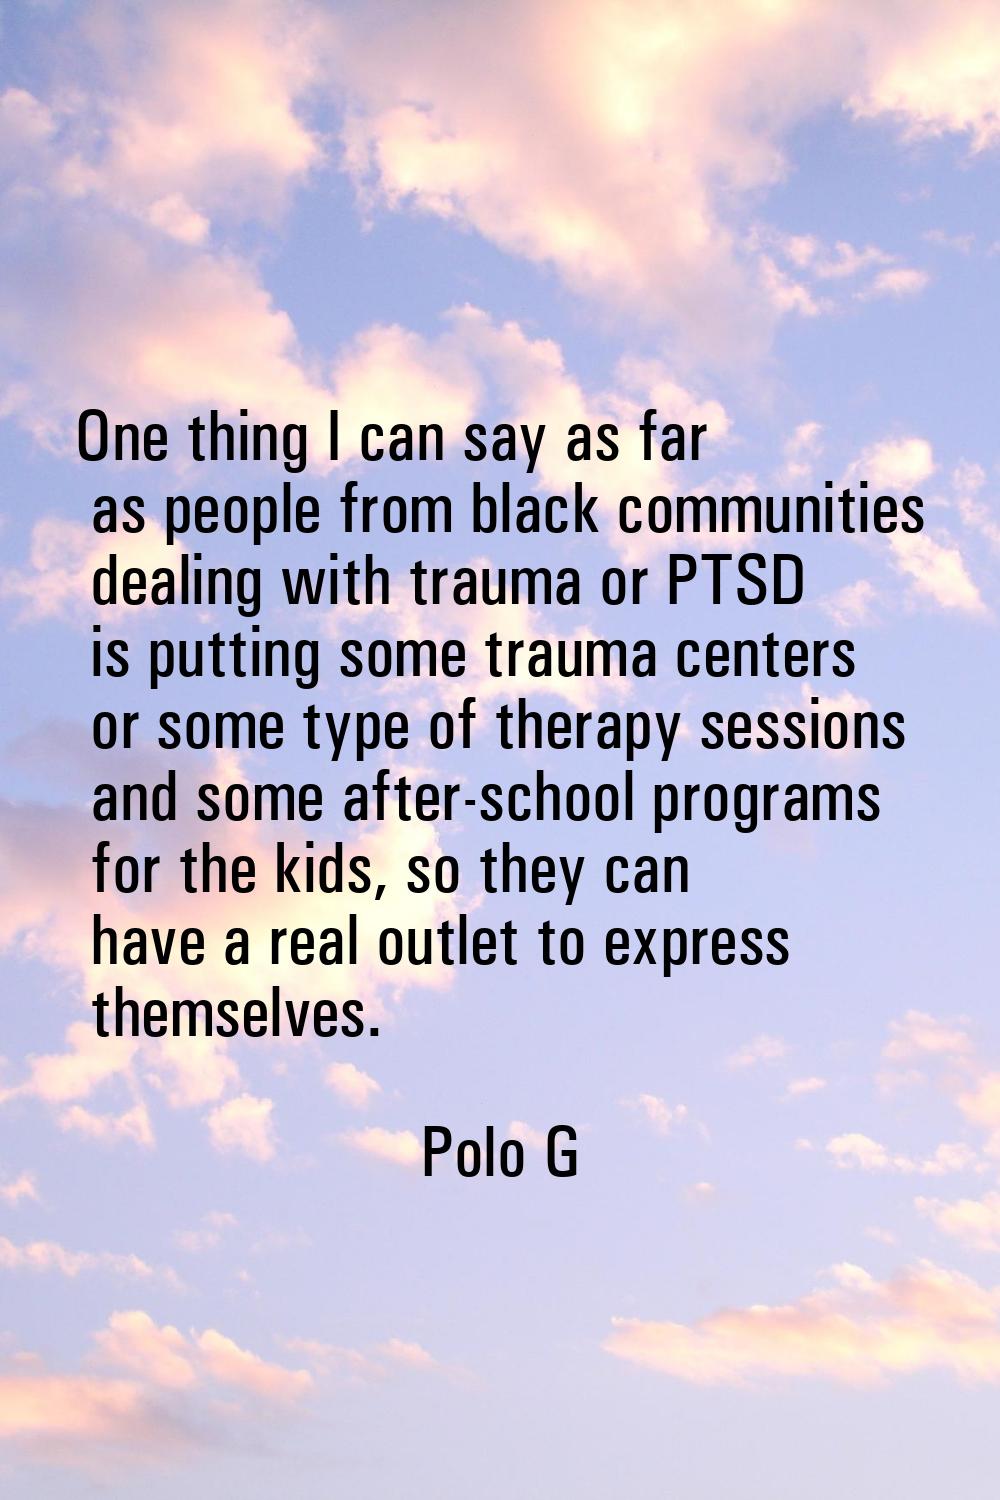 One thing I can say as far as people from black communities dealing with trauma or PTSD is putting 